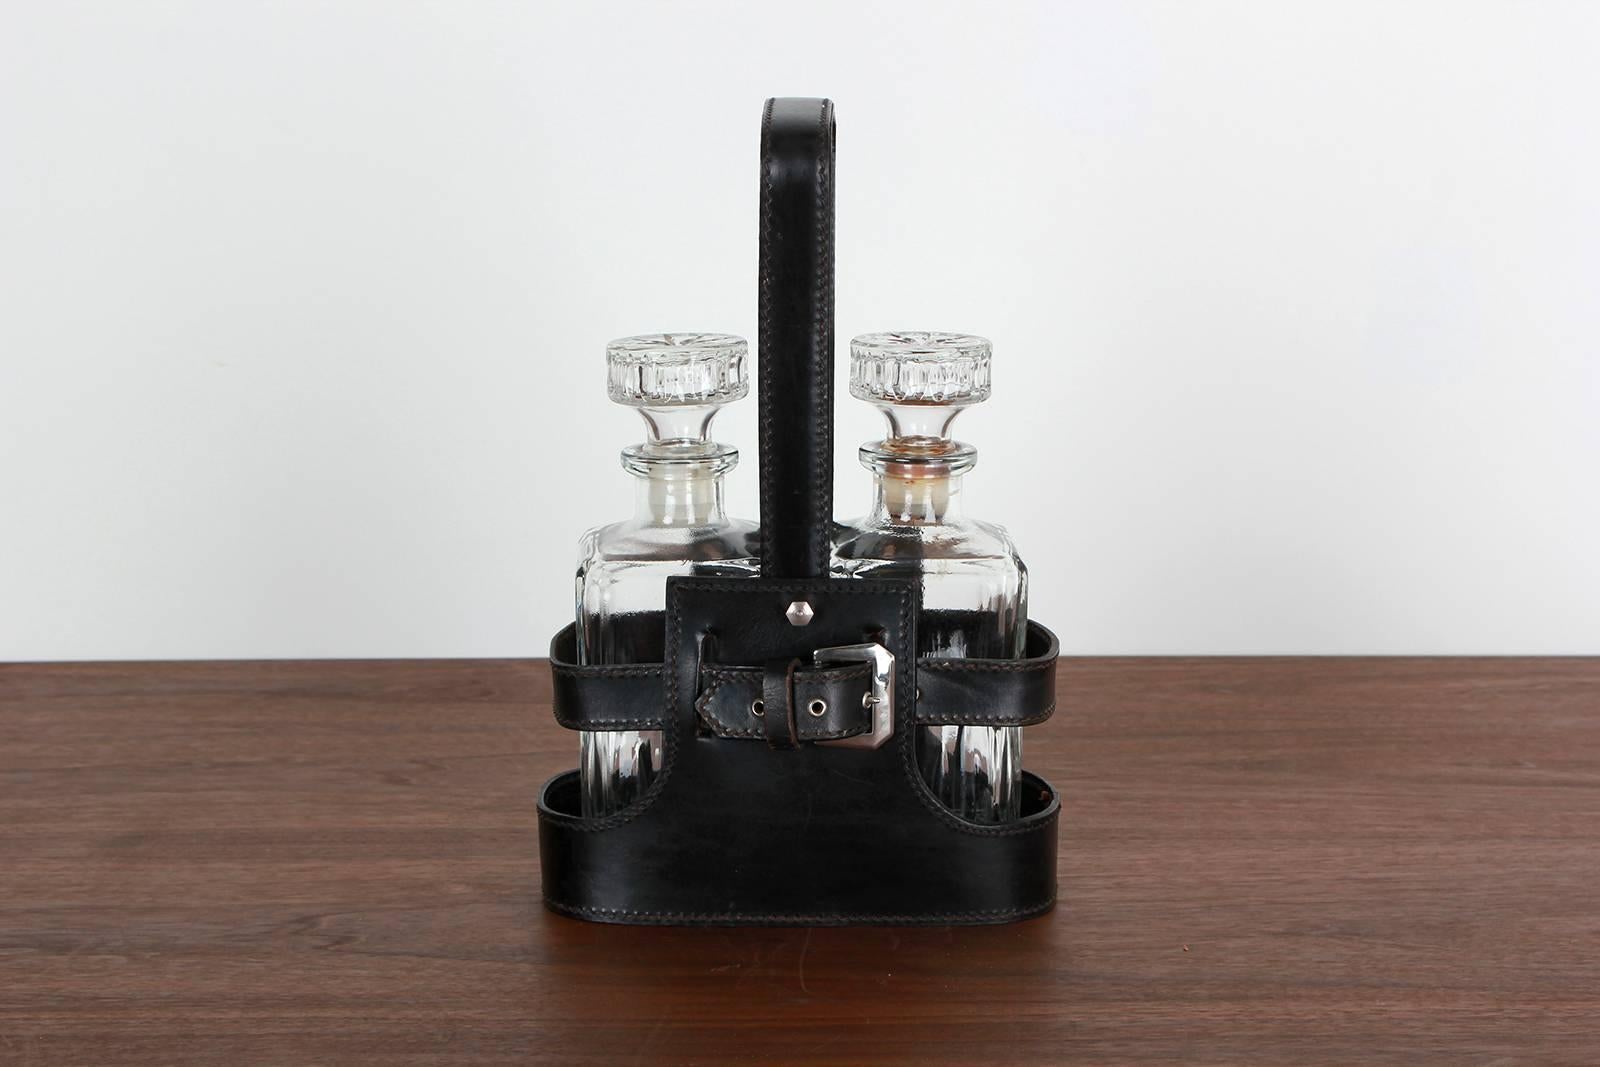 Handsome Adnet style Mid-Century leather caddy. Two impressive decanters with thick glass. Excellent vintage condition.